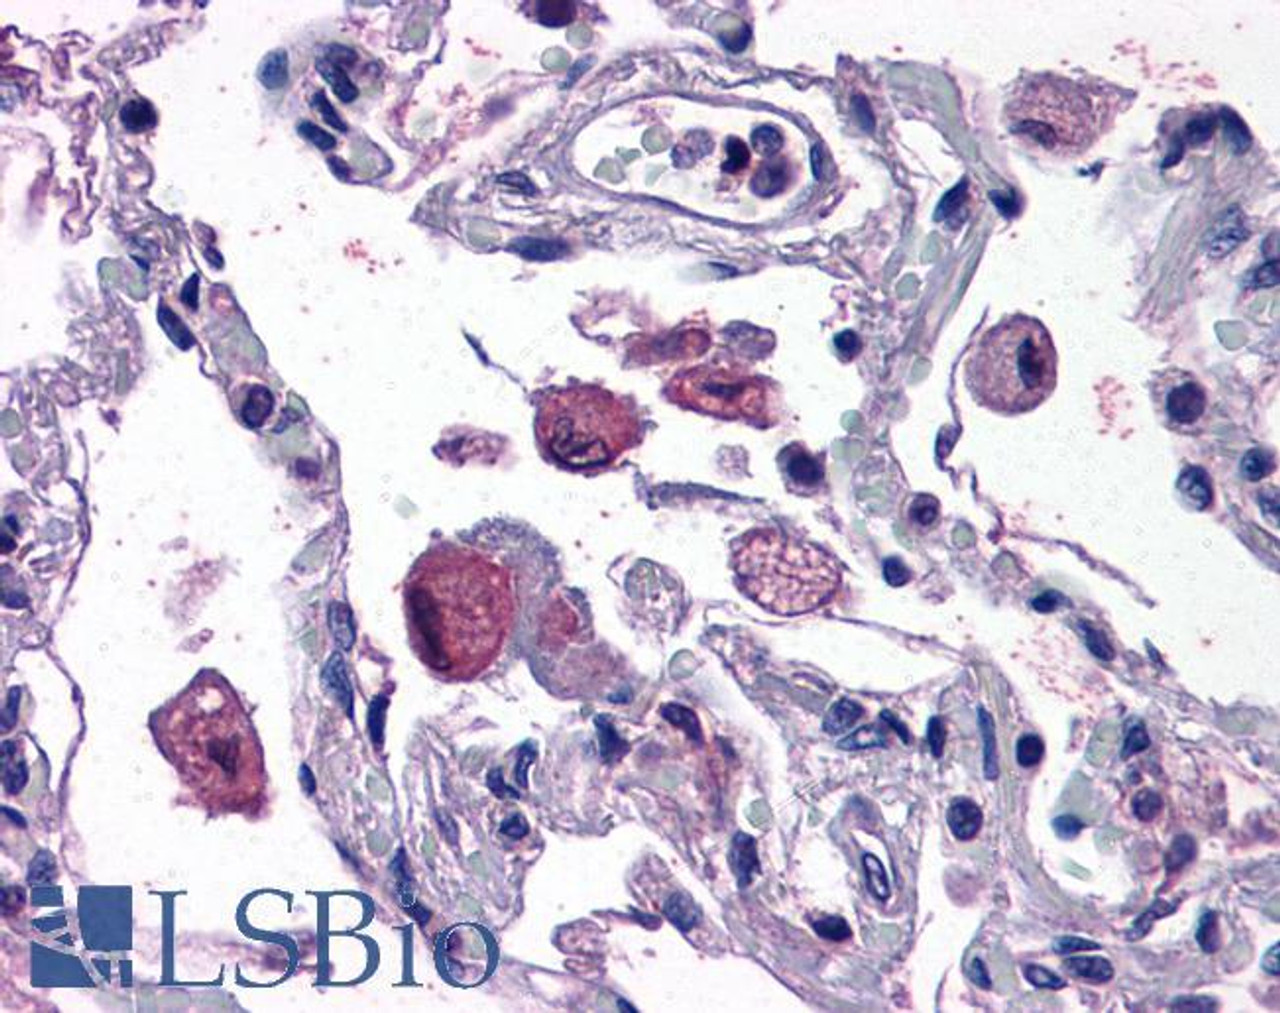 45-242 (3.75ug/ml) staining of paraffin embedded Human Spleen. Steamed antigen retrieval with citrate buffer pH 6, AP-staining.